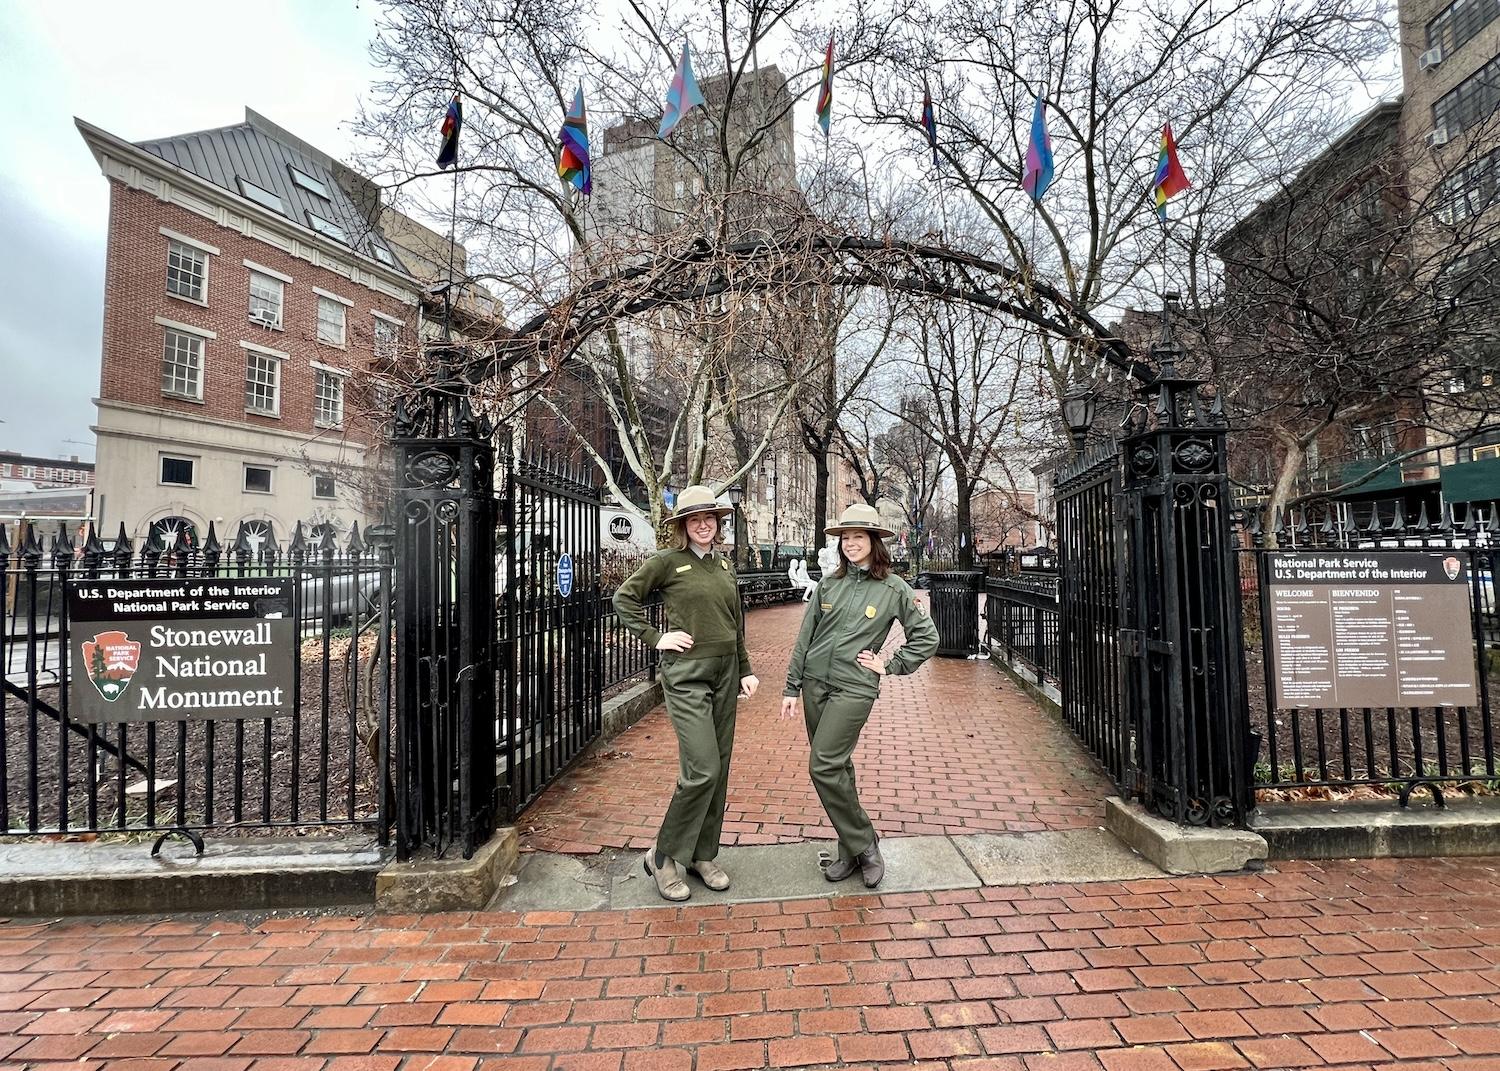 Supervisory ranger Callie Tominsky and lead ranger Julie Burna stand at the entrance arch to Stonewall National Monument.